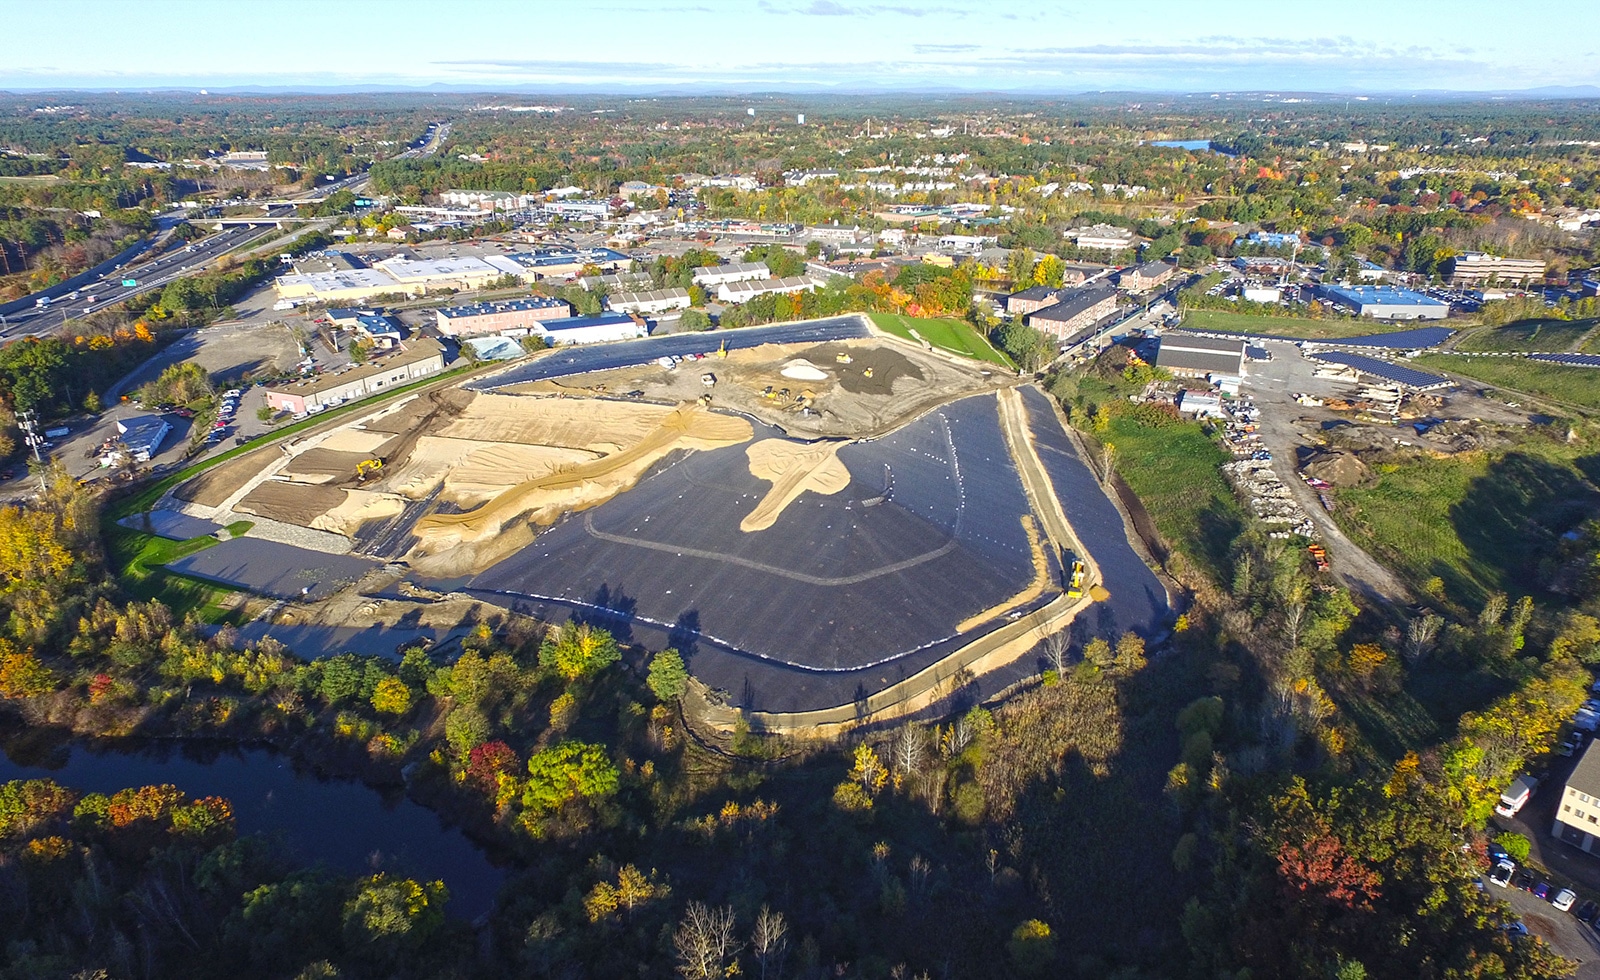 Glenview landfill project overhead